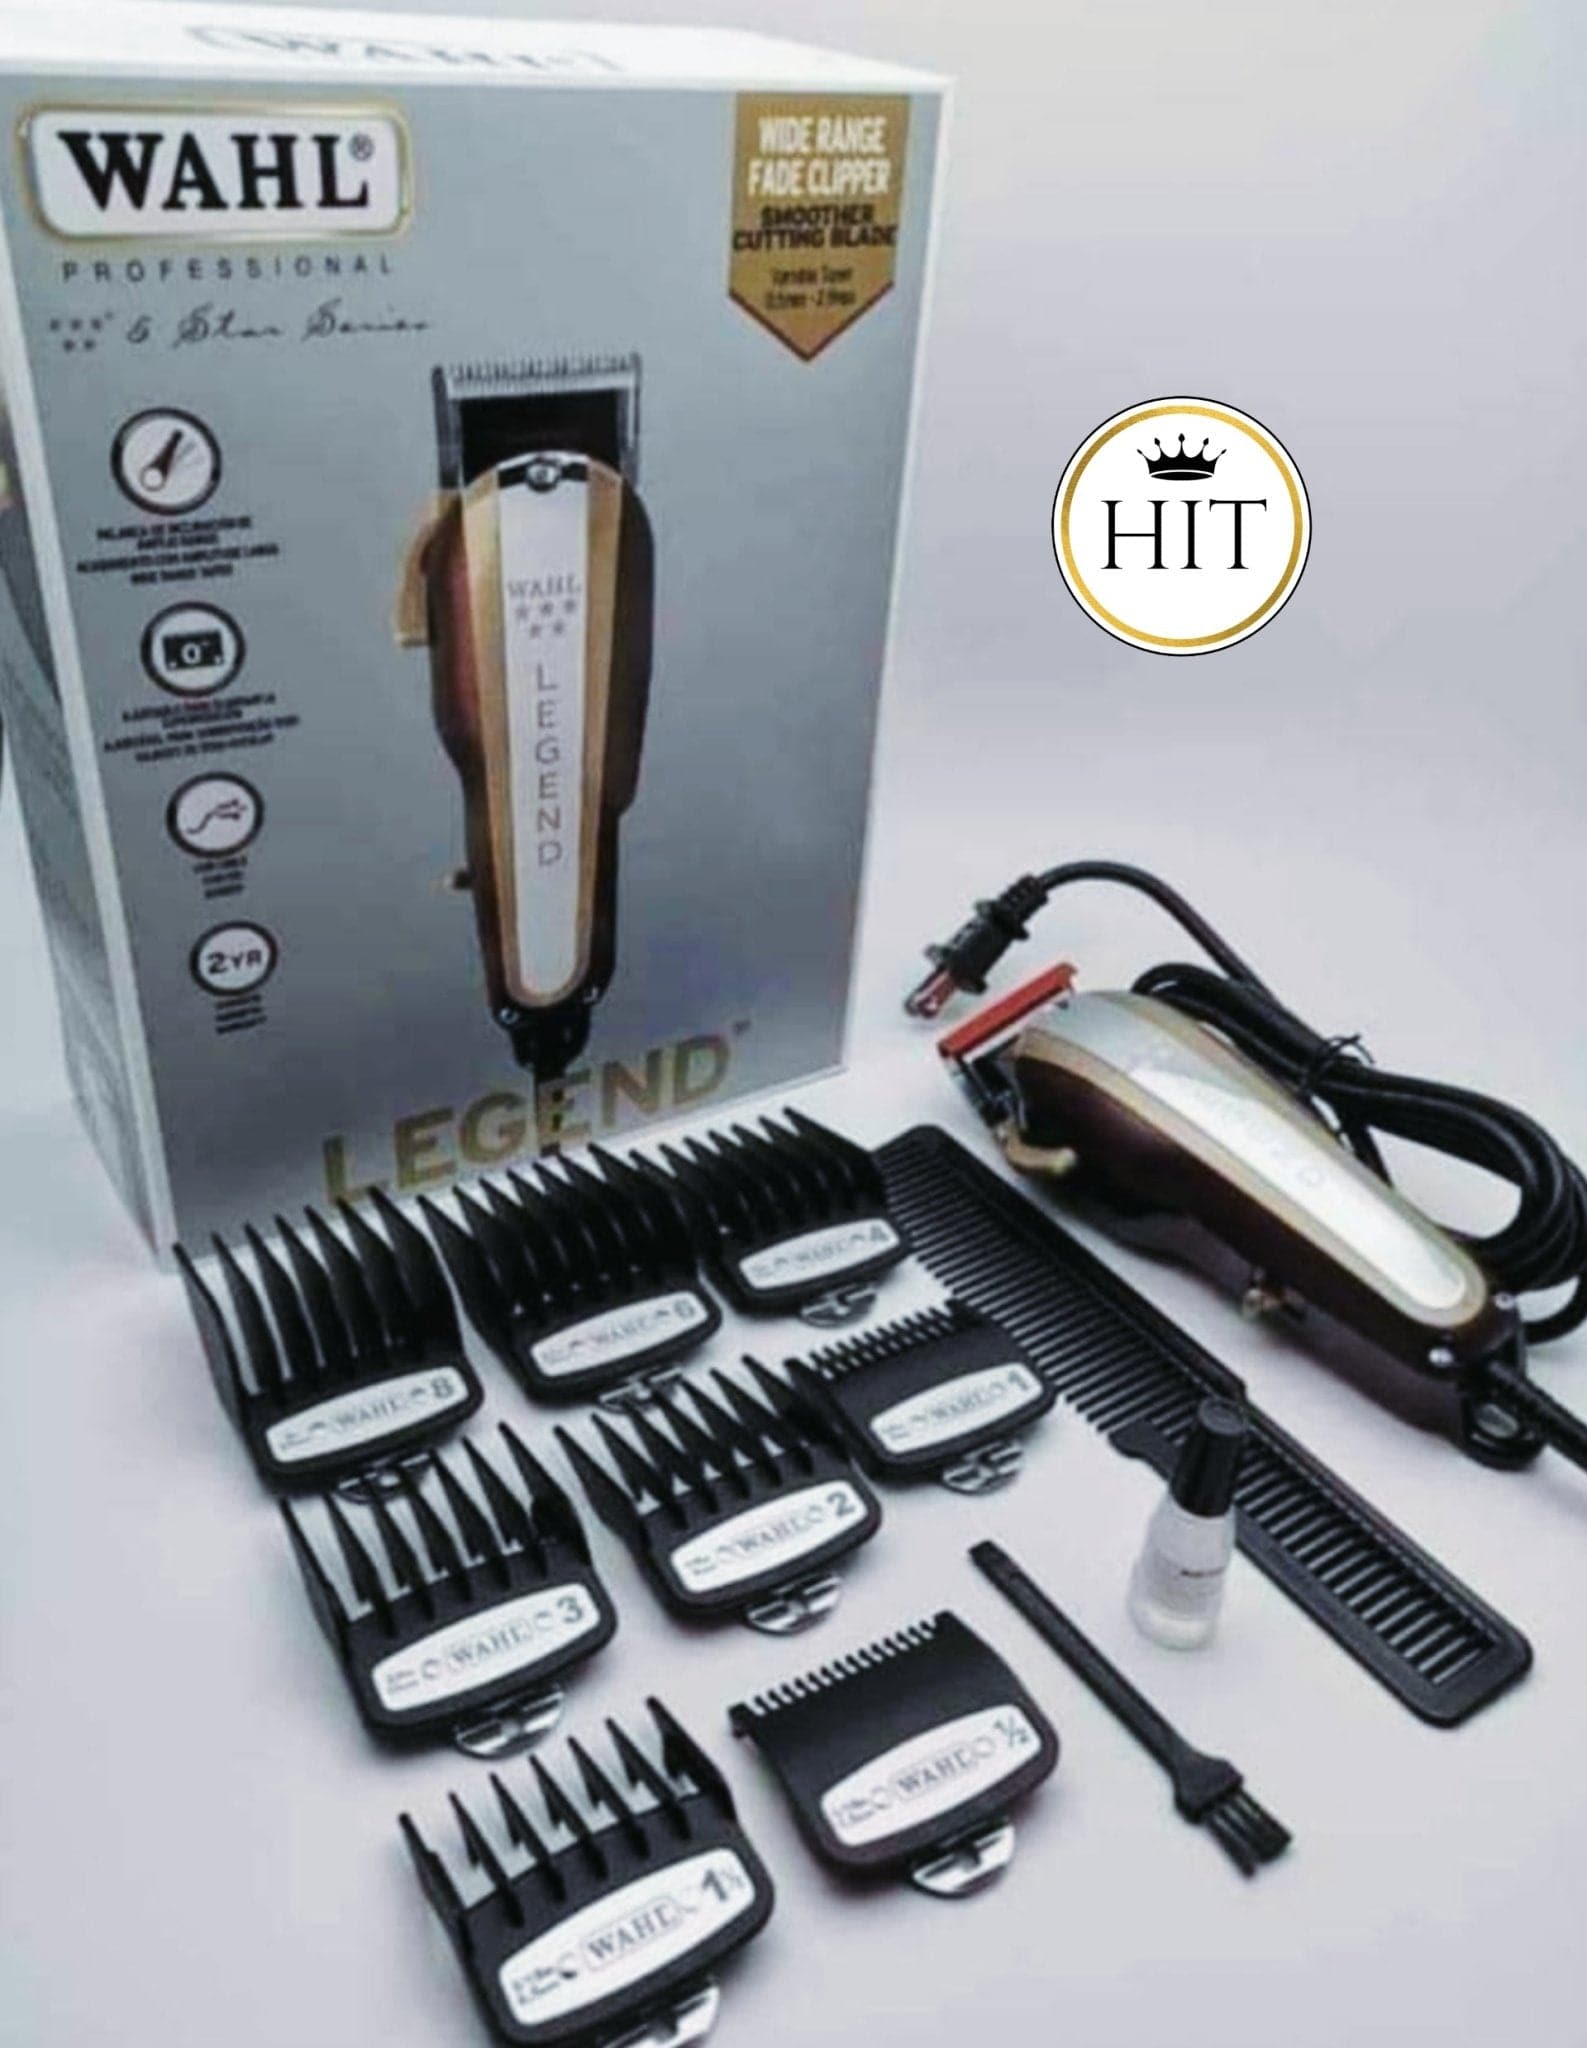 WAHL Legend Profesional ( 100% Original ) - colombiahit